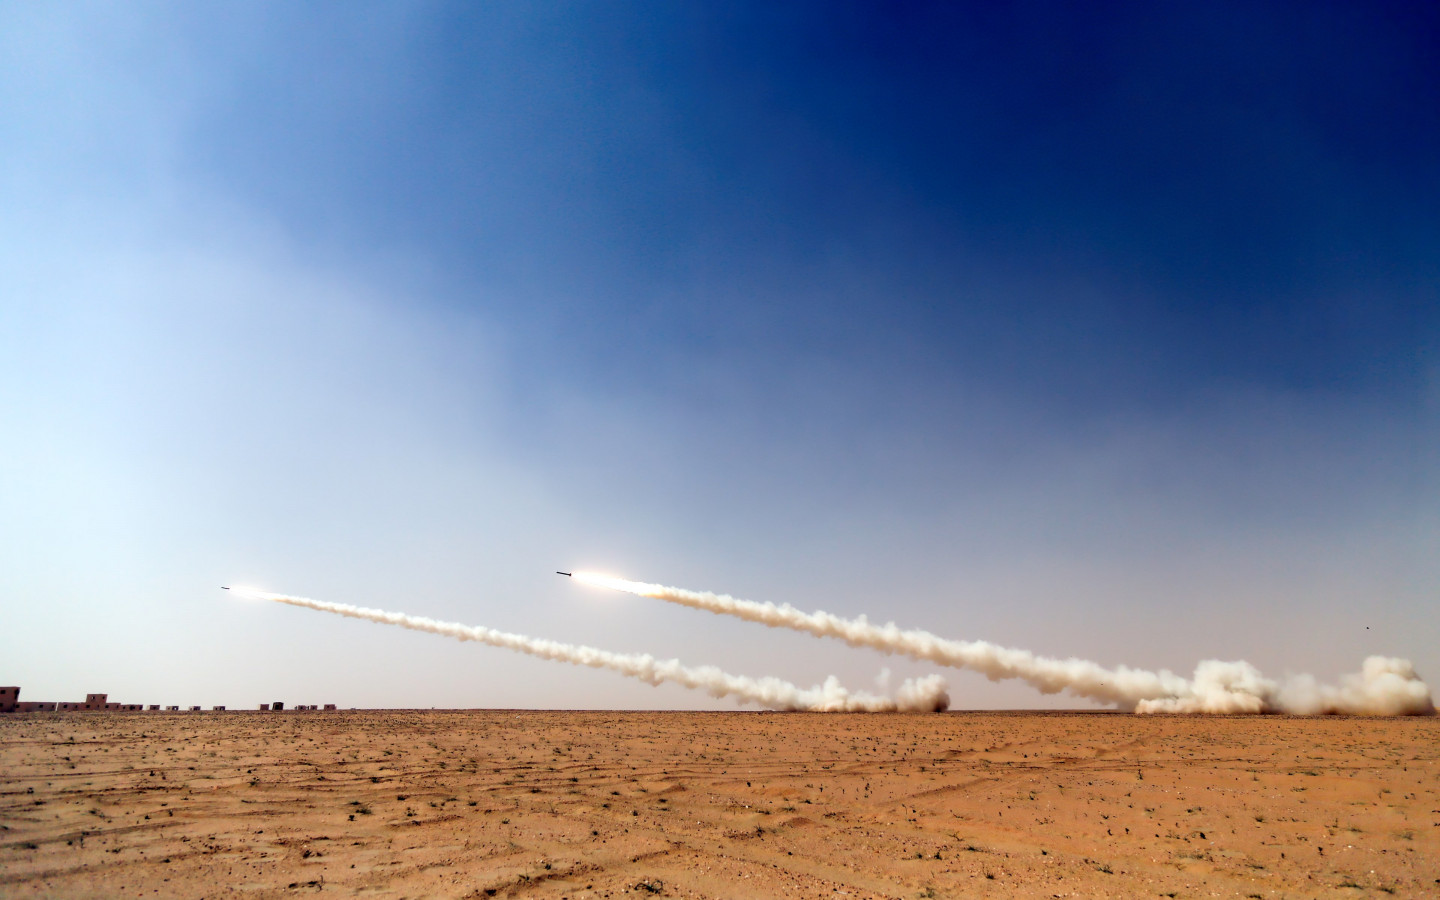 Military rockets on the sky wallpaper 1440x900